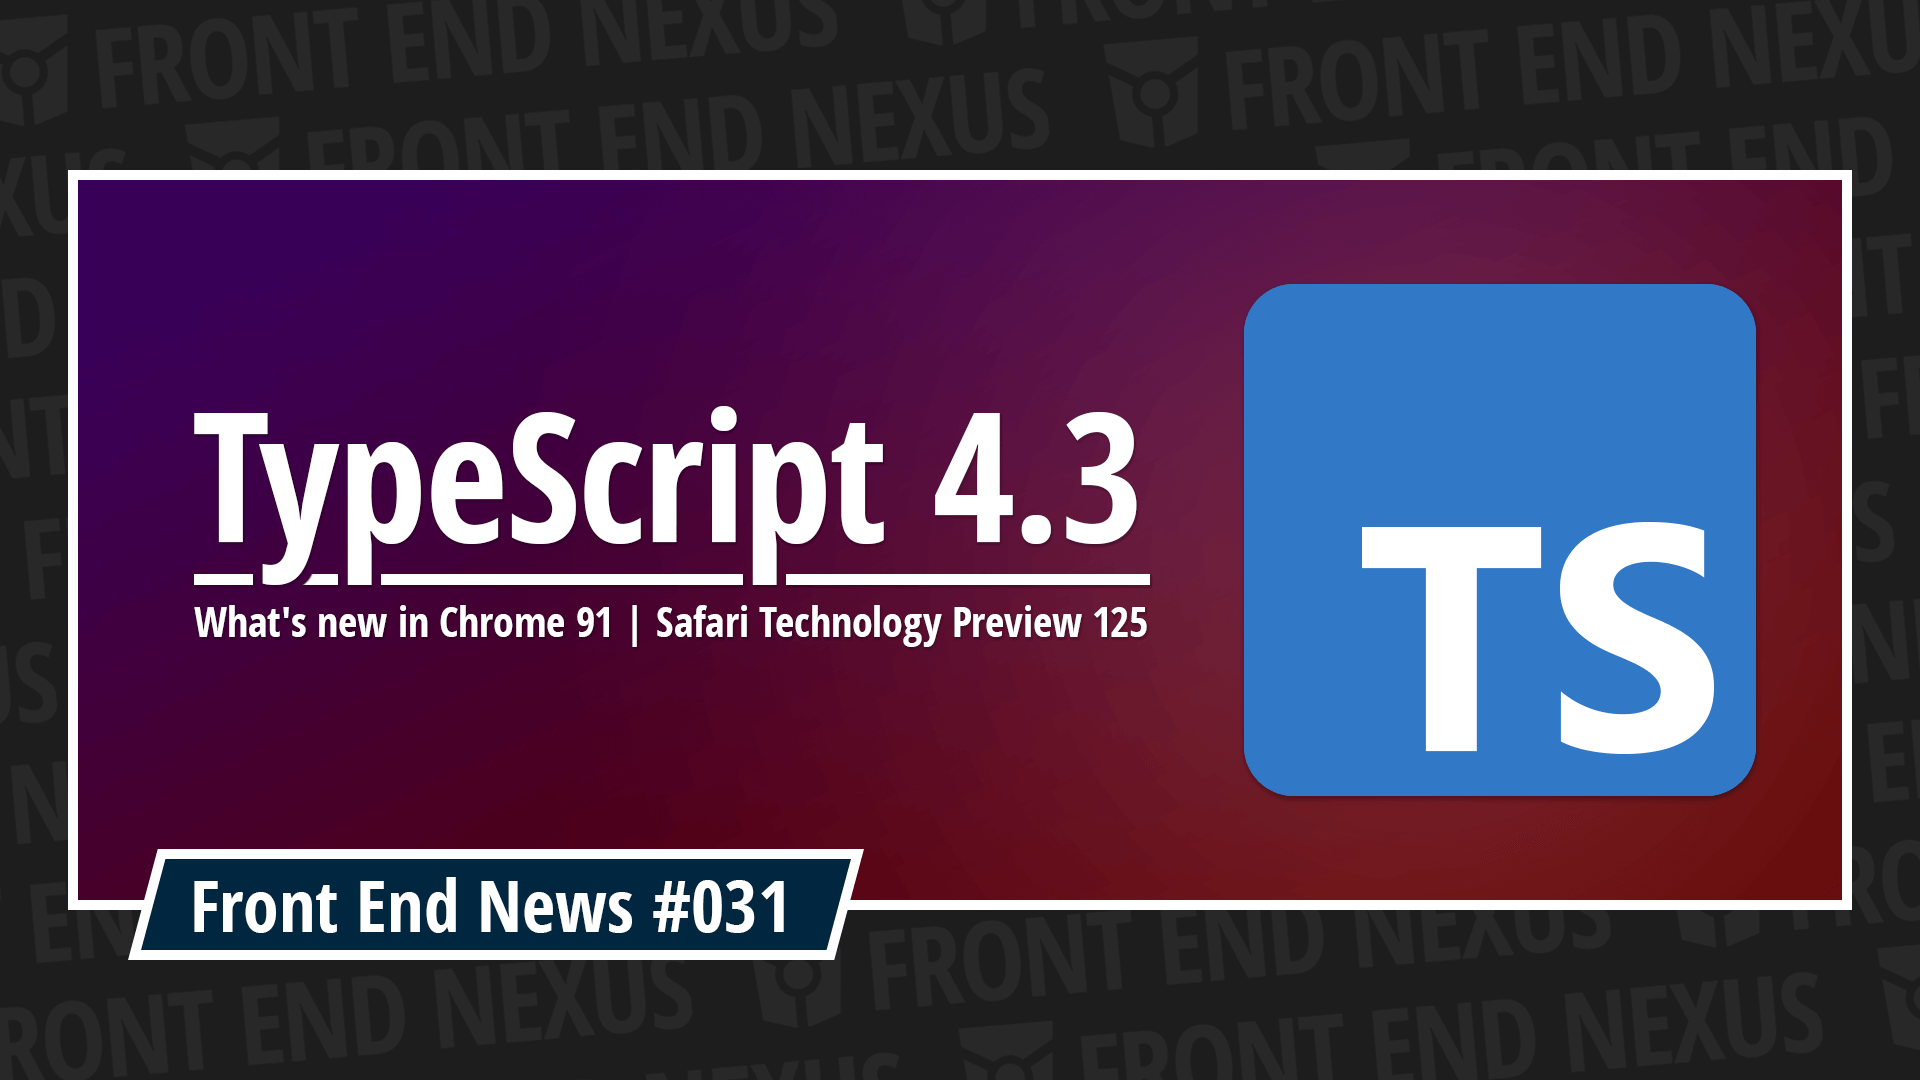 Introducing TypeScript 4.3, what's new in Chrome 91, and Safari Technology Preview 125 | Front End News #031